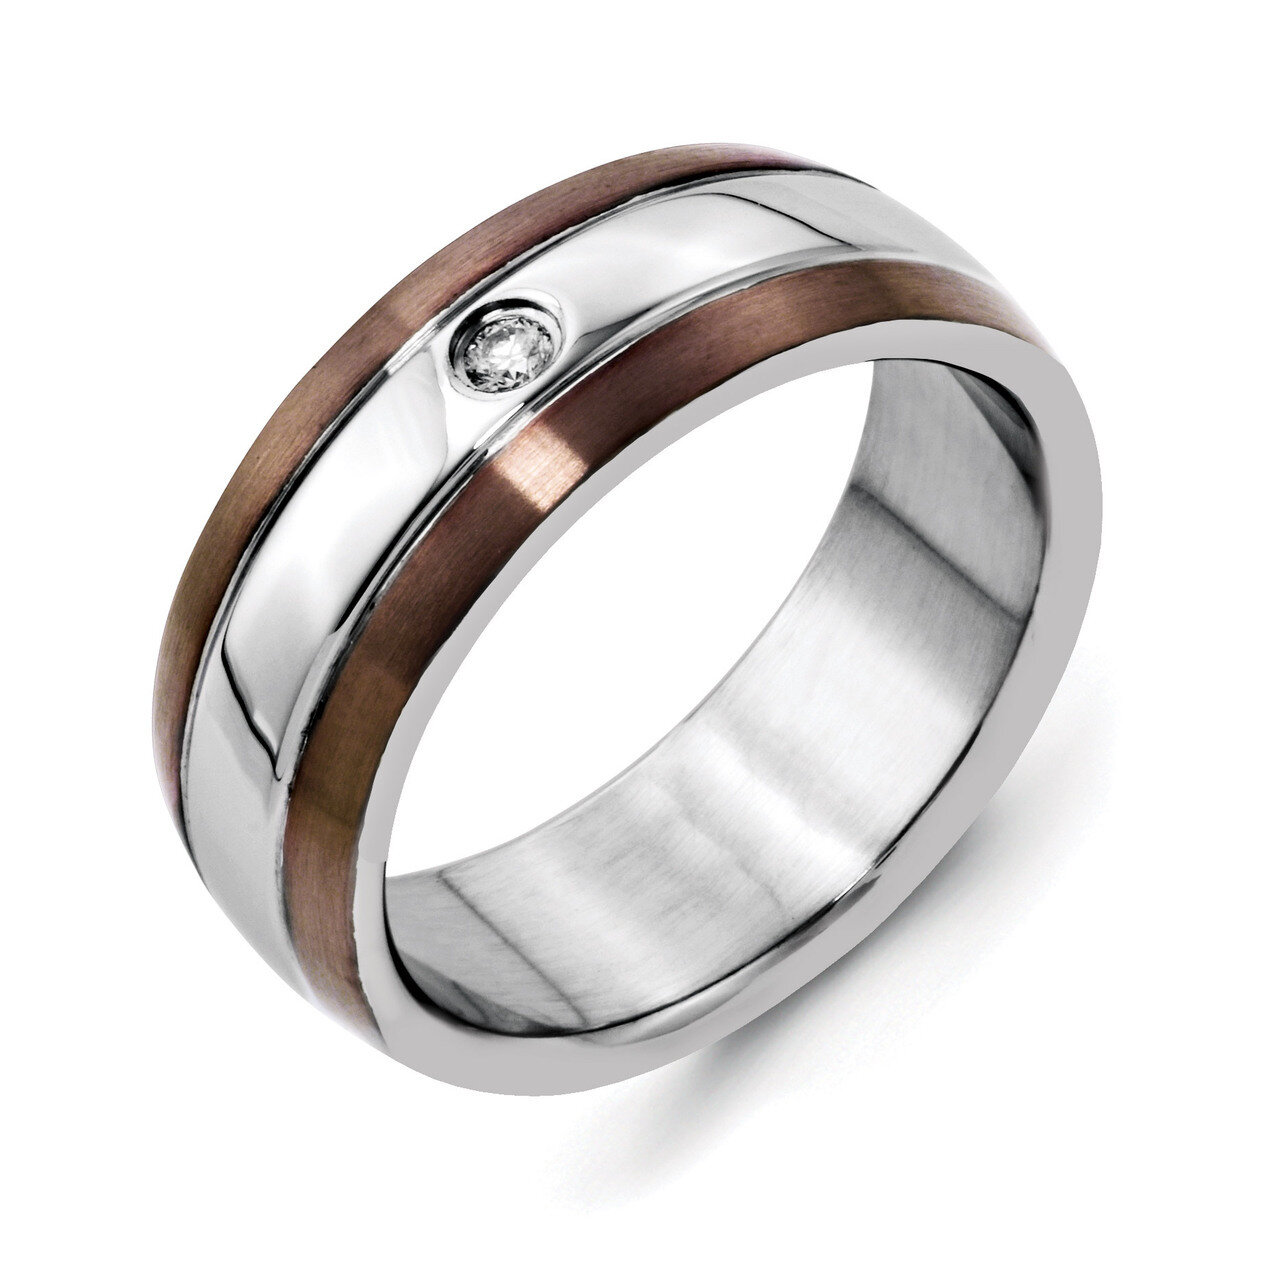 Chocolate IP-plated Brushed with Diamond 8mm Polished Band - Stainless Steel SR51